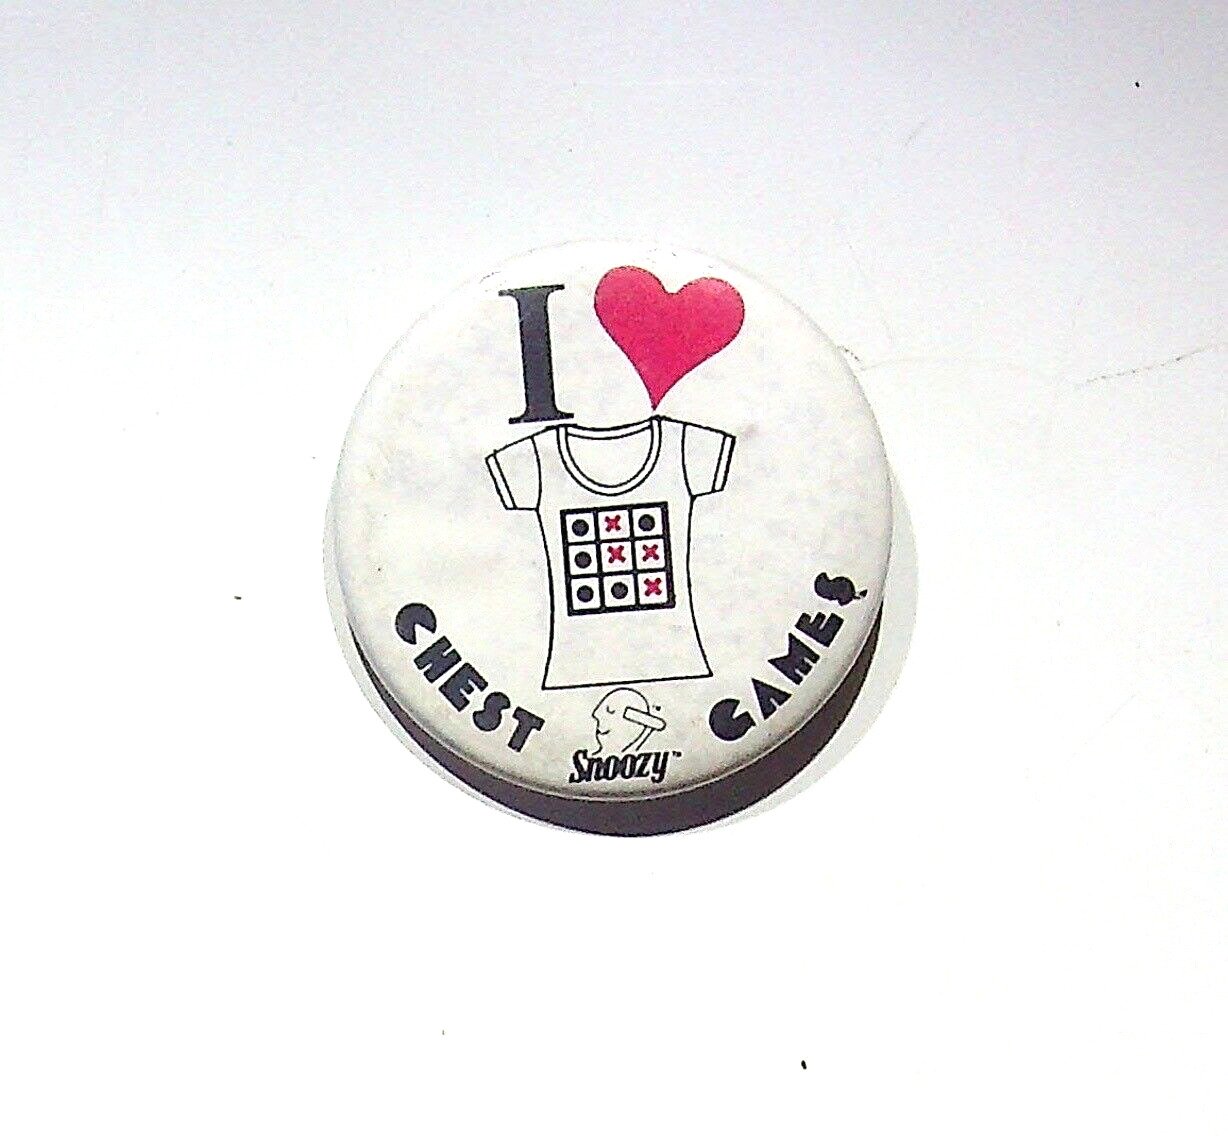 I LOVE CHEST GAMES SNOOZY - VINTAGE ADVERTISING BUTTON PIN